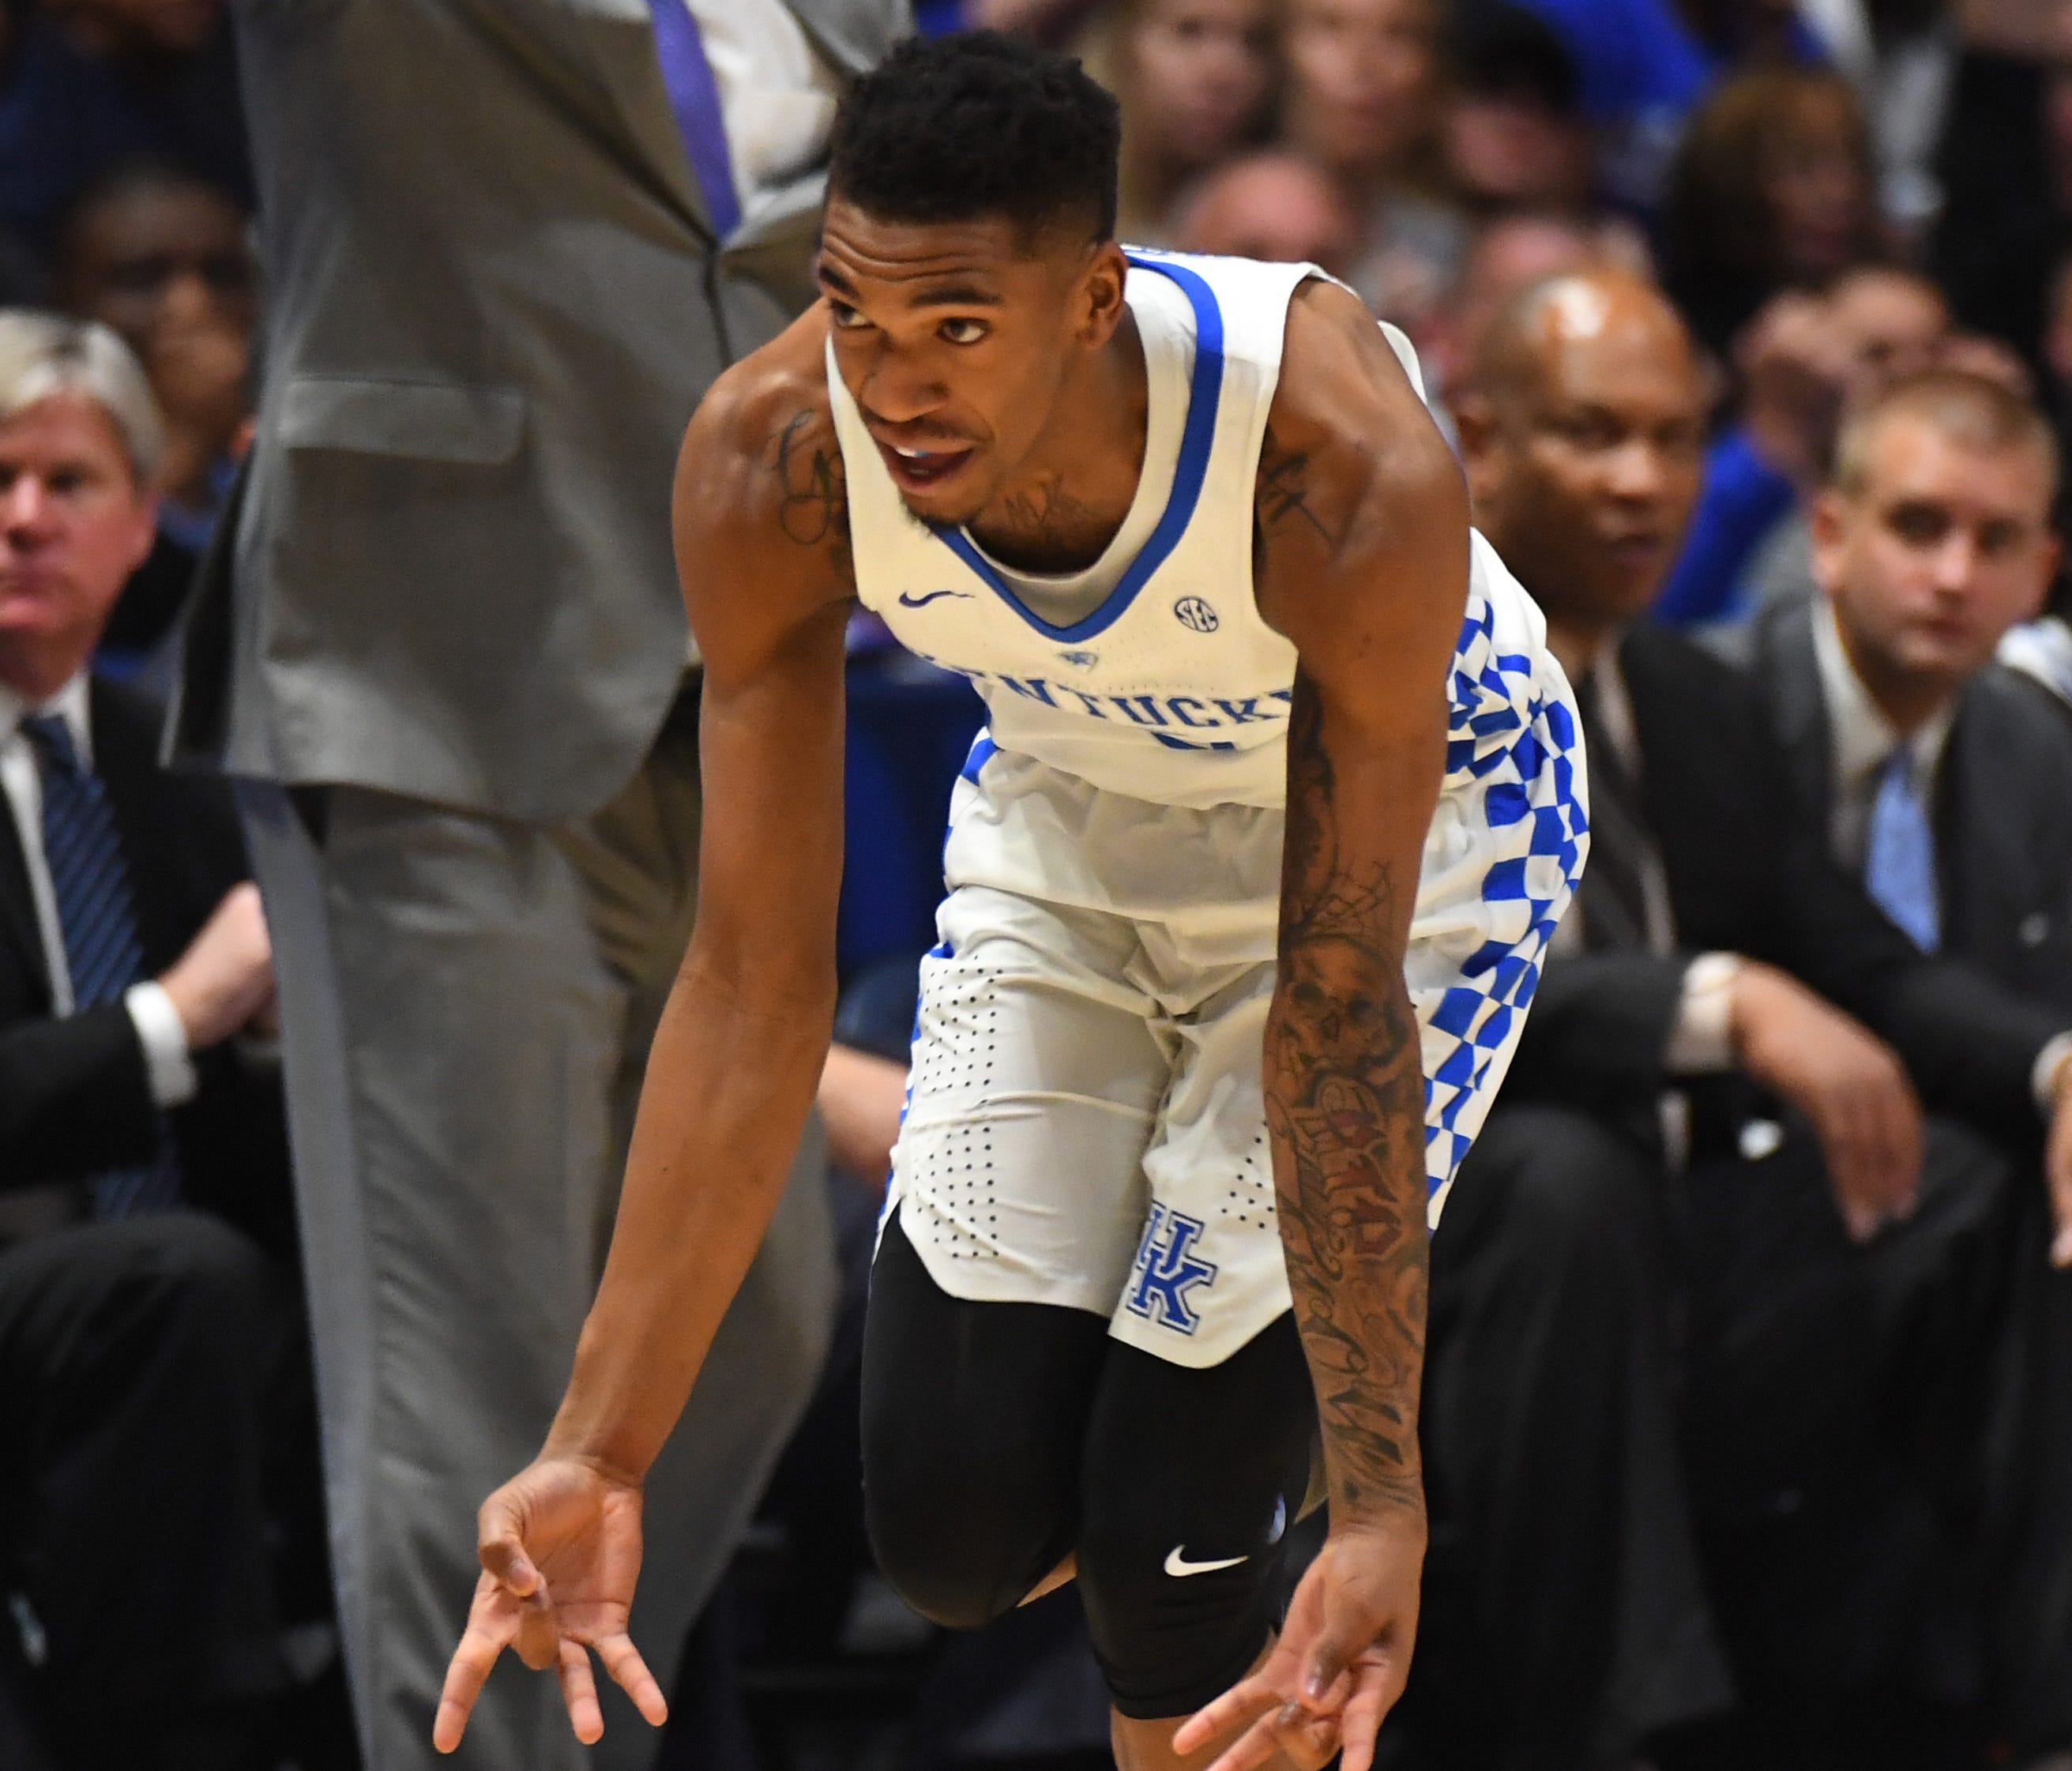 Kentucky Wildcats guard Malik Monk (5) celebrates after a three pointer during the second half against the Arkansas Razorbacks during the SEC Conference Tournament at Bridgestone Arena.